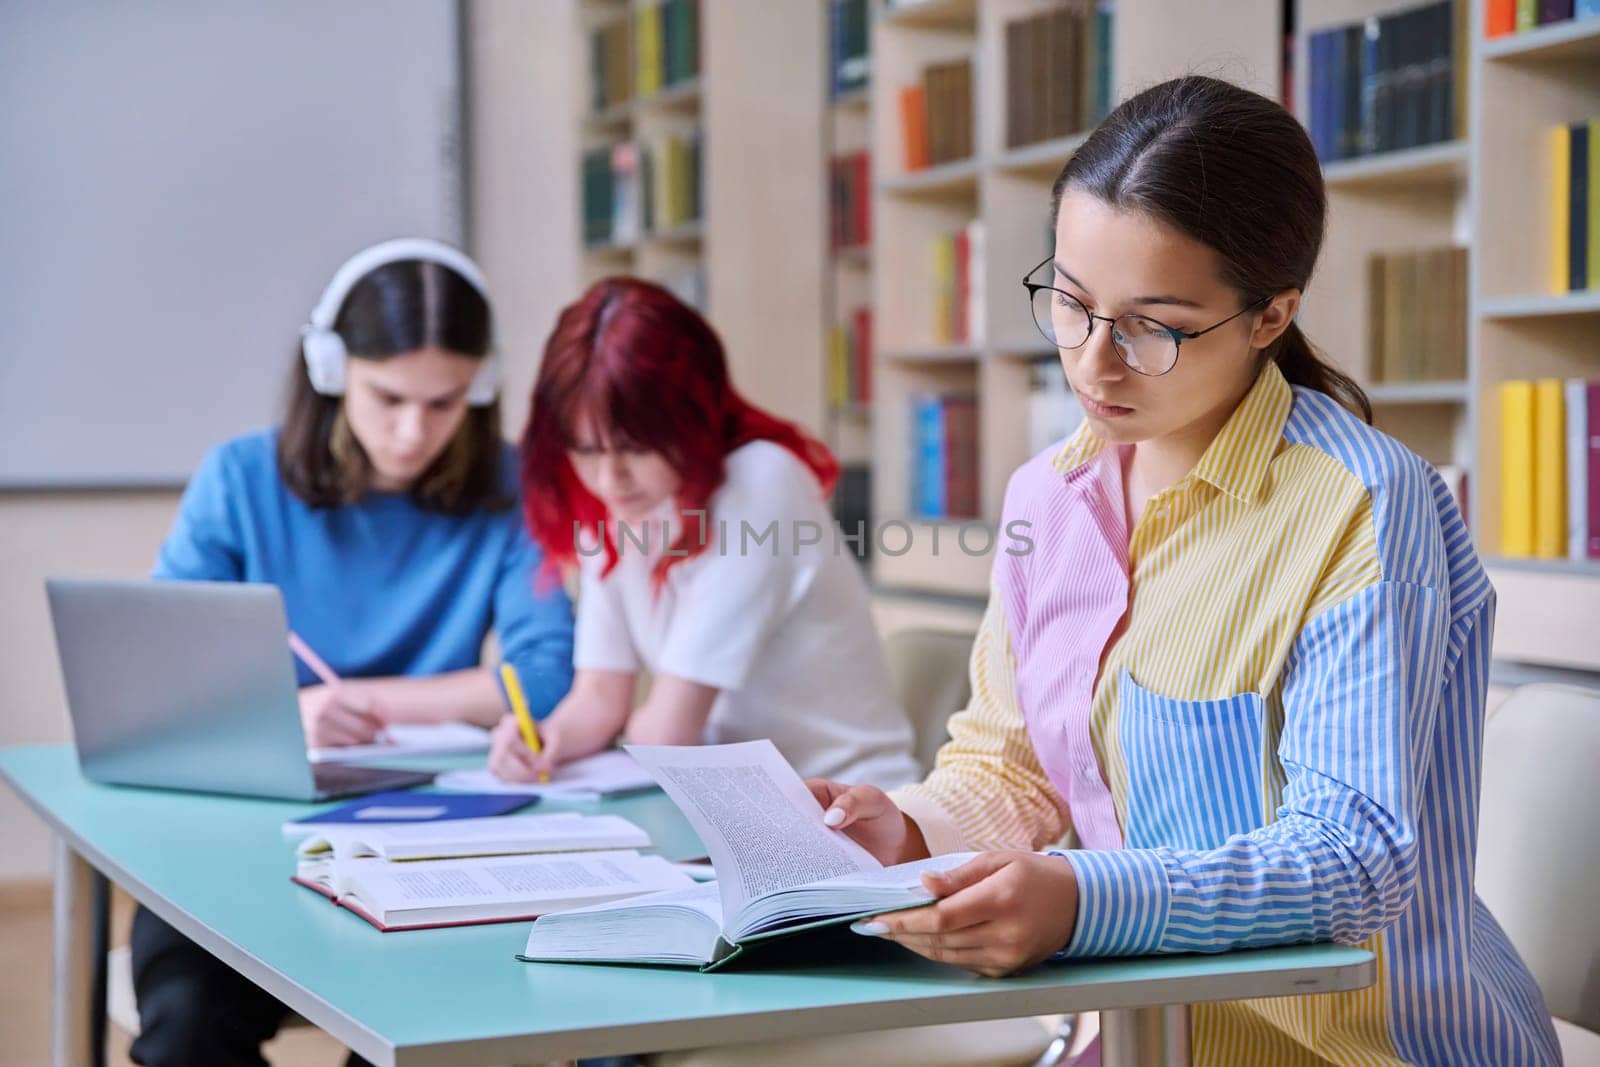 High school students studying in library class, teenage girl in focus. Group of teenagers sitting at desk, writing in notebooks, using laptop books. Knowledge, education, adolescence concept